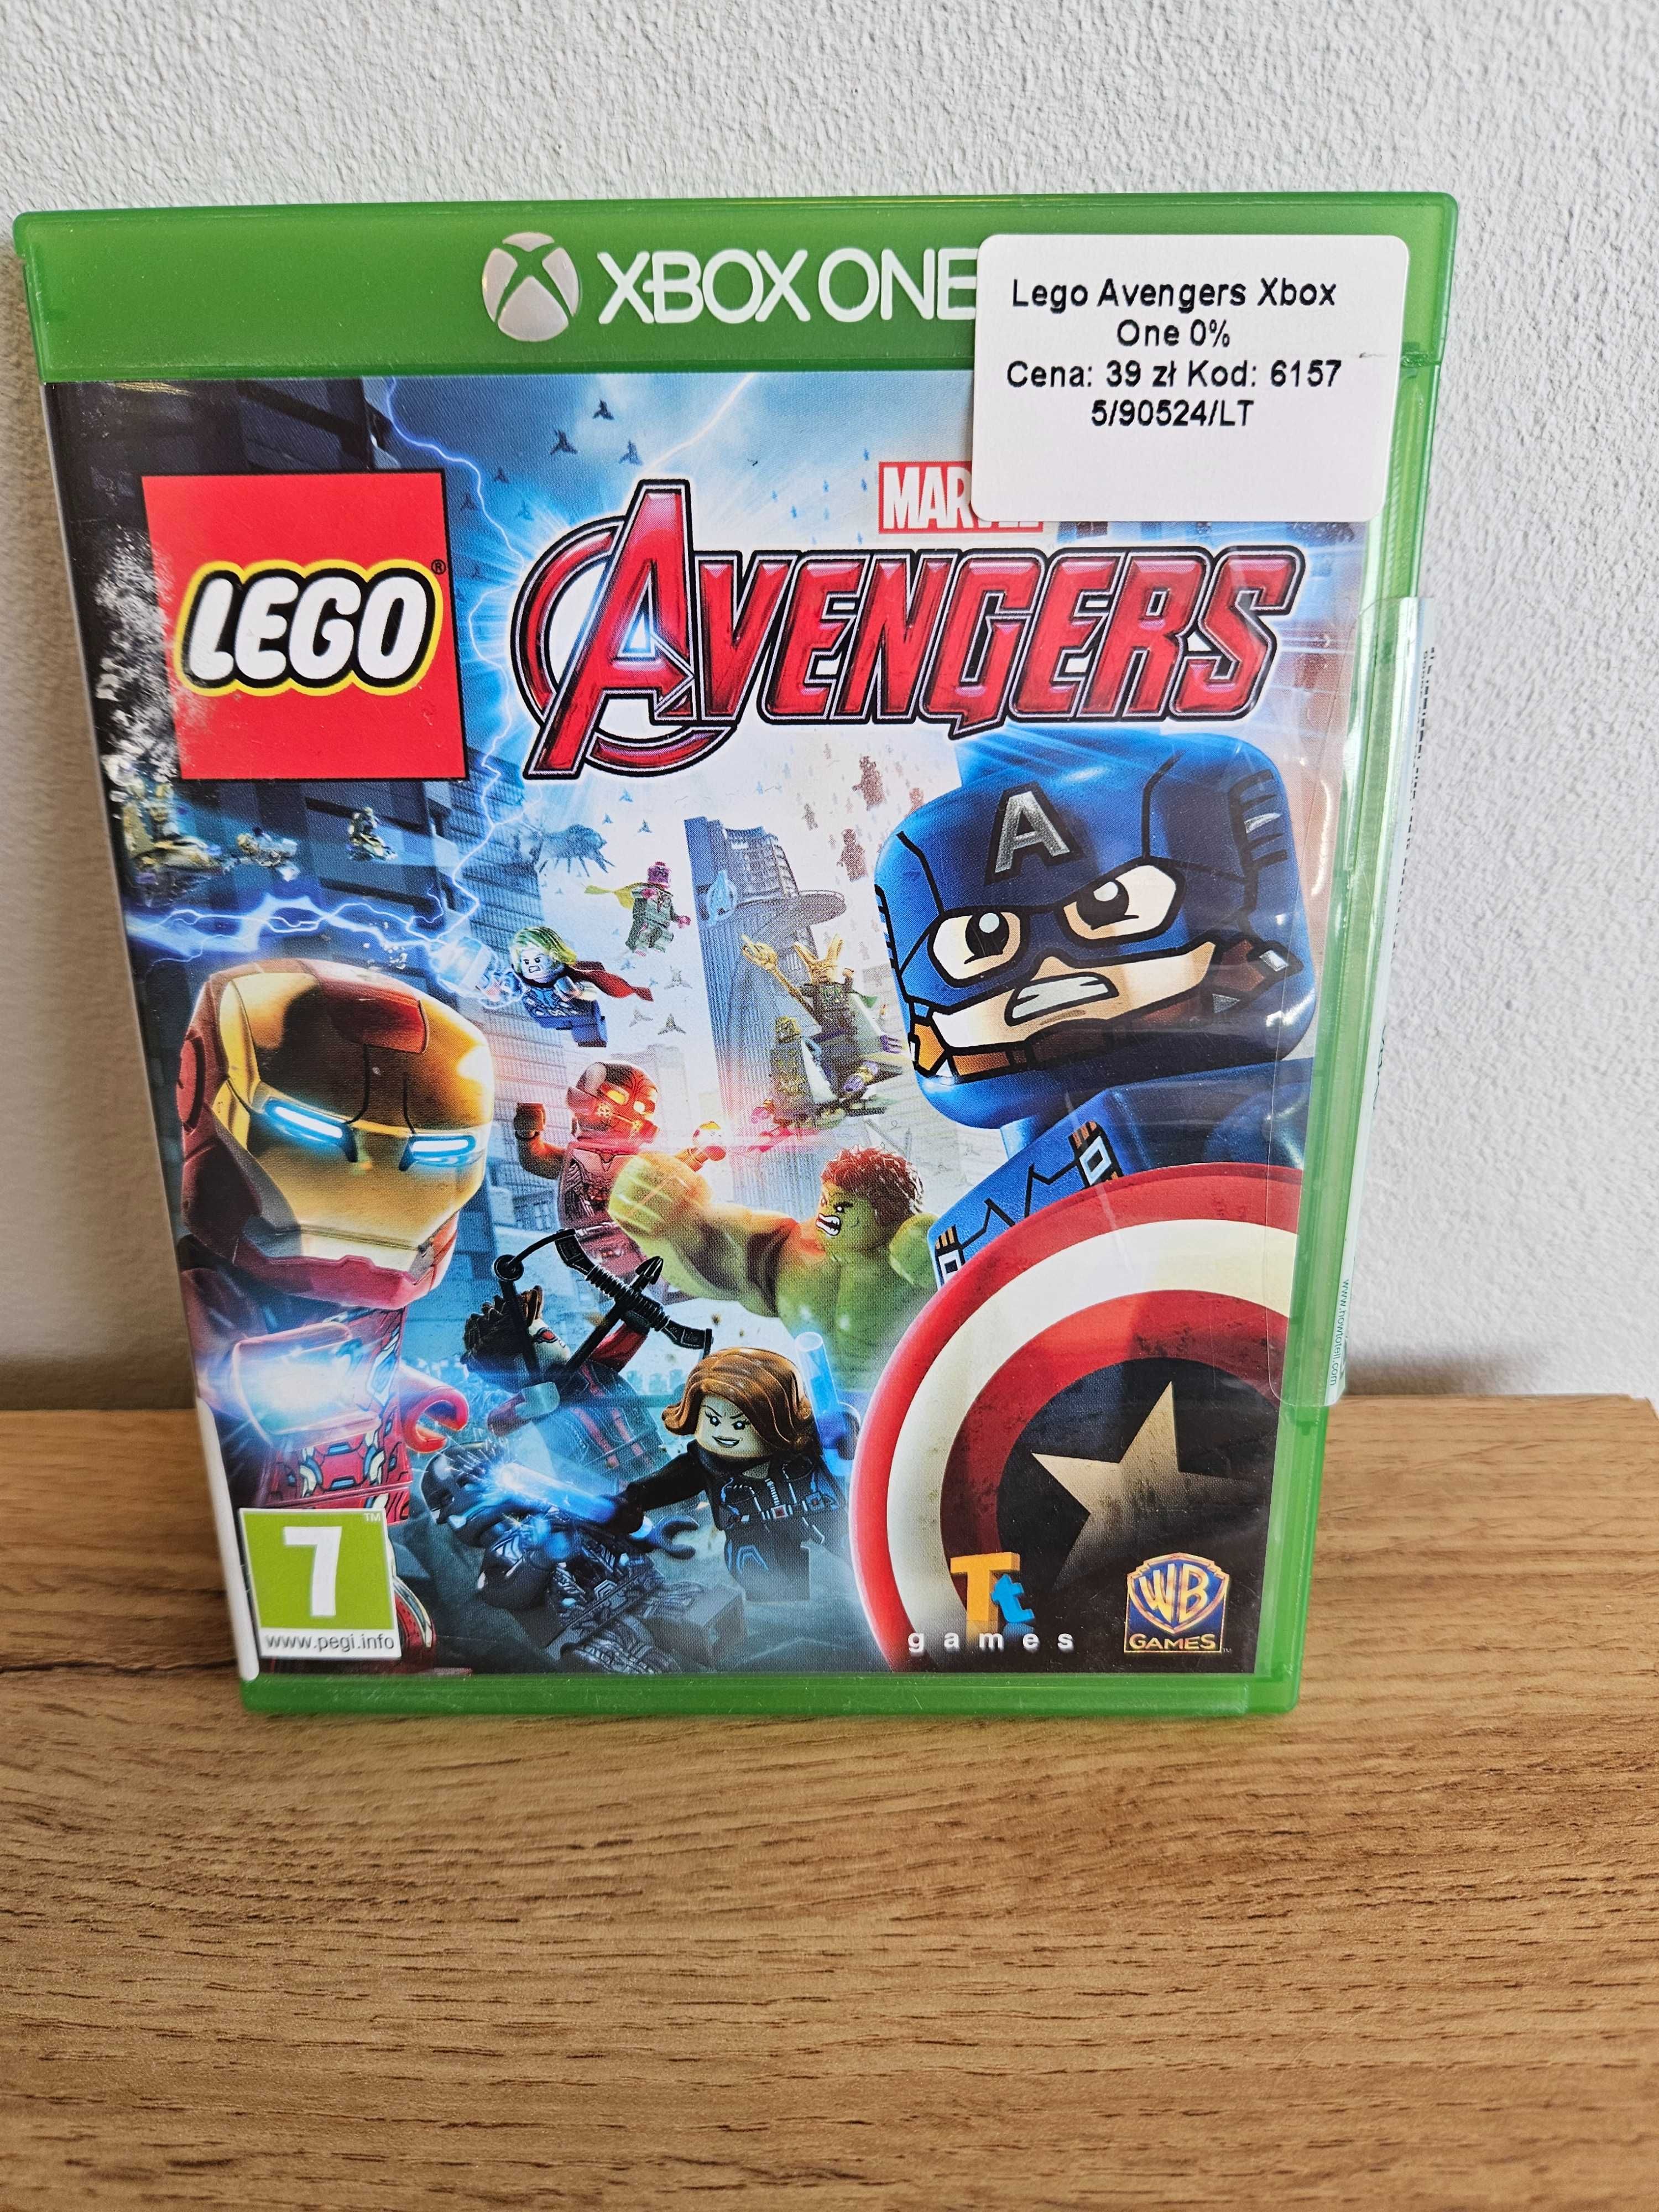 Lego Avengers Xbox One Series - As Game & GSM